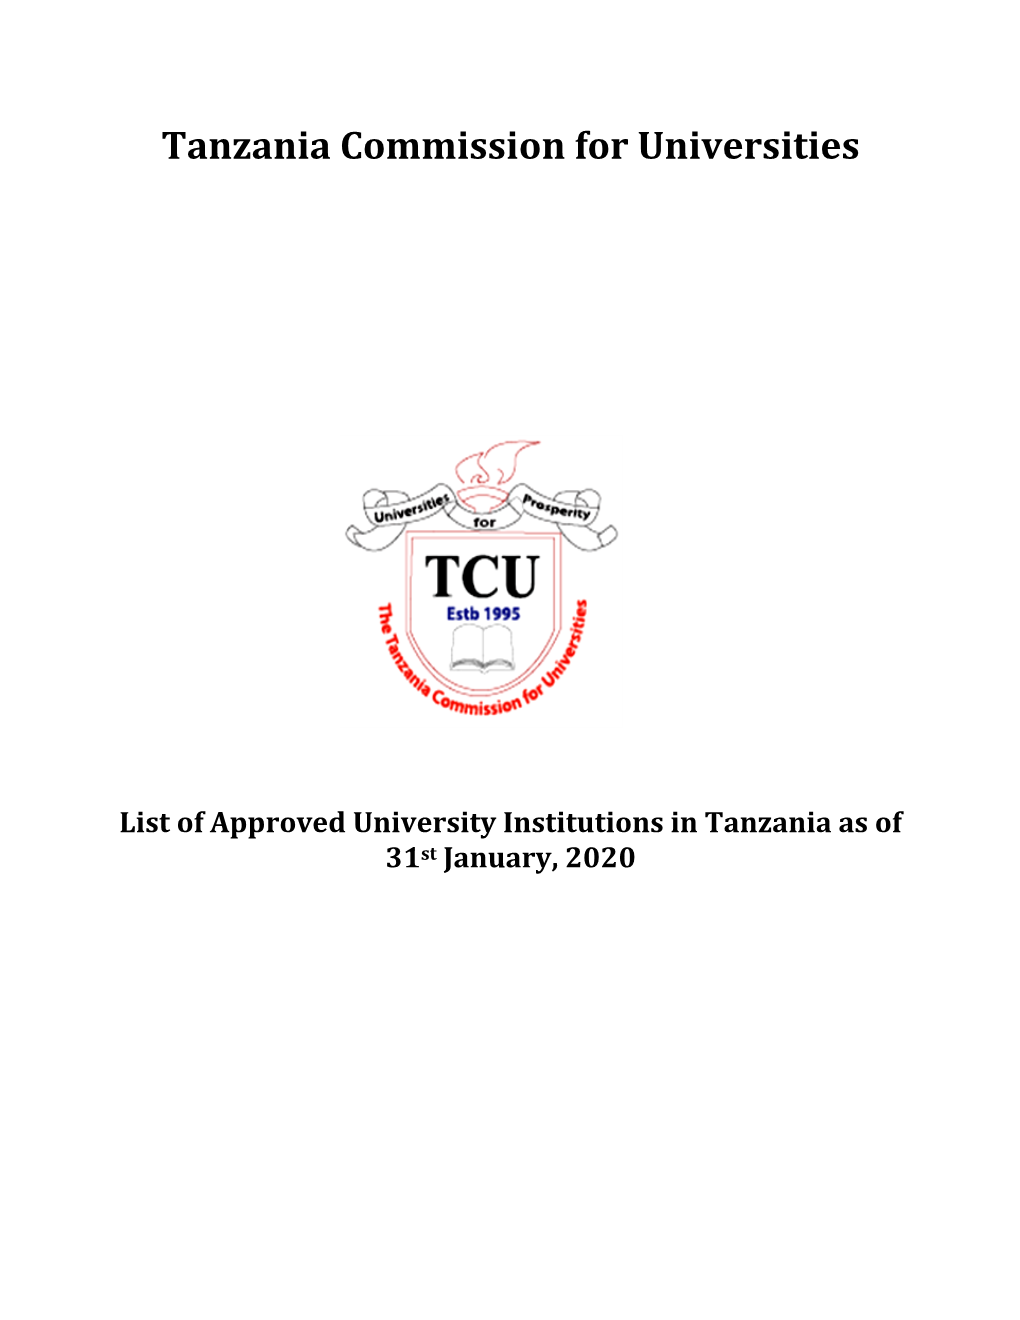 List of Approved University Institutions in Tanzania As of 31St January, 2020